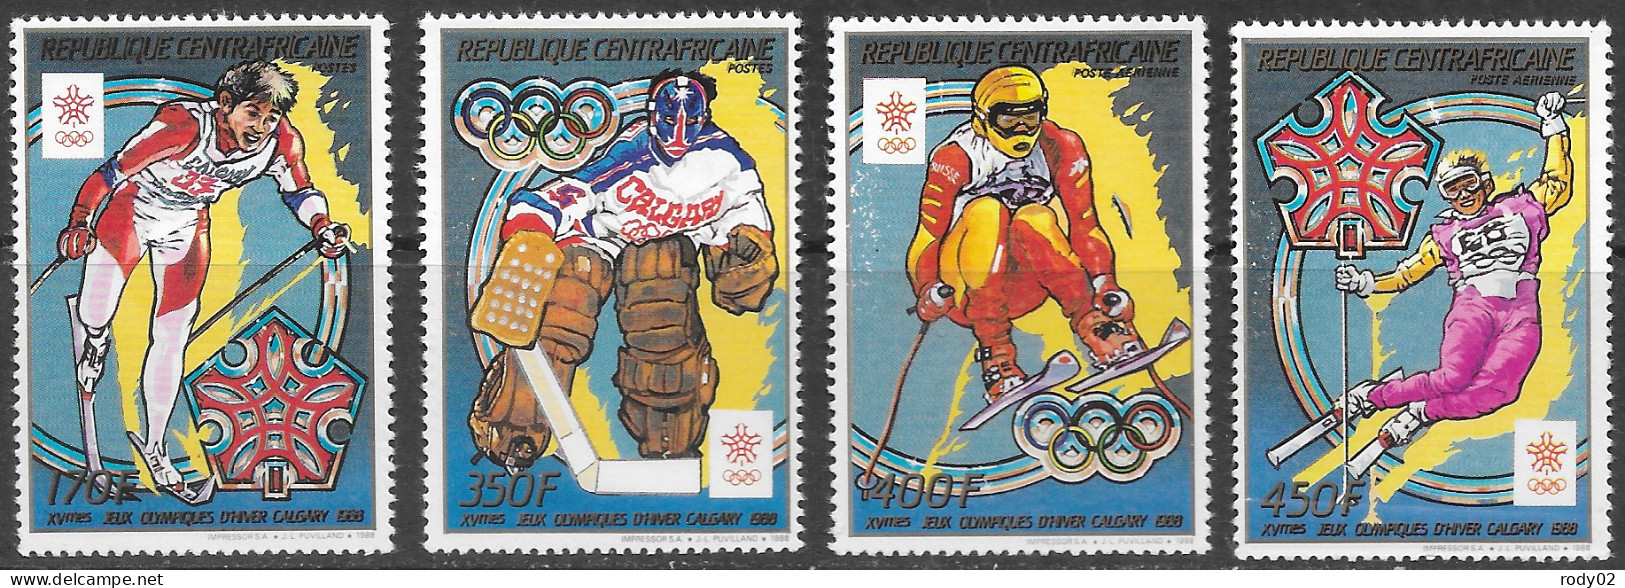 CENTRAFRIQUE - JEUX OLYMPIQUES D'HIVER A CALGARY - N° 795 A 796 ET PA 377 A 378 - NEUF** MNH - Hiver 1988: Calgary